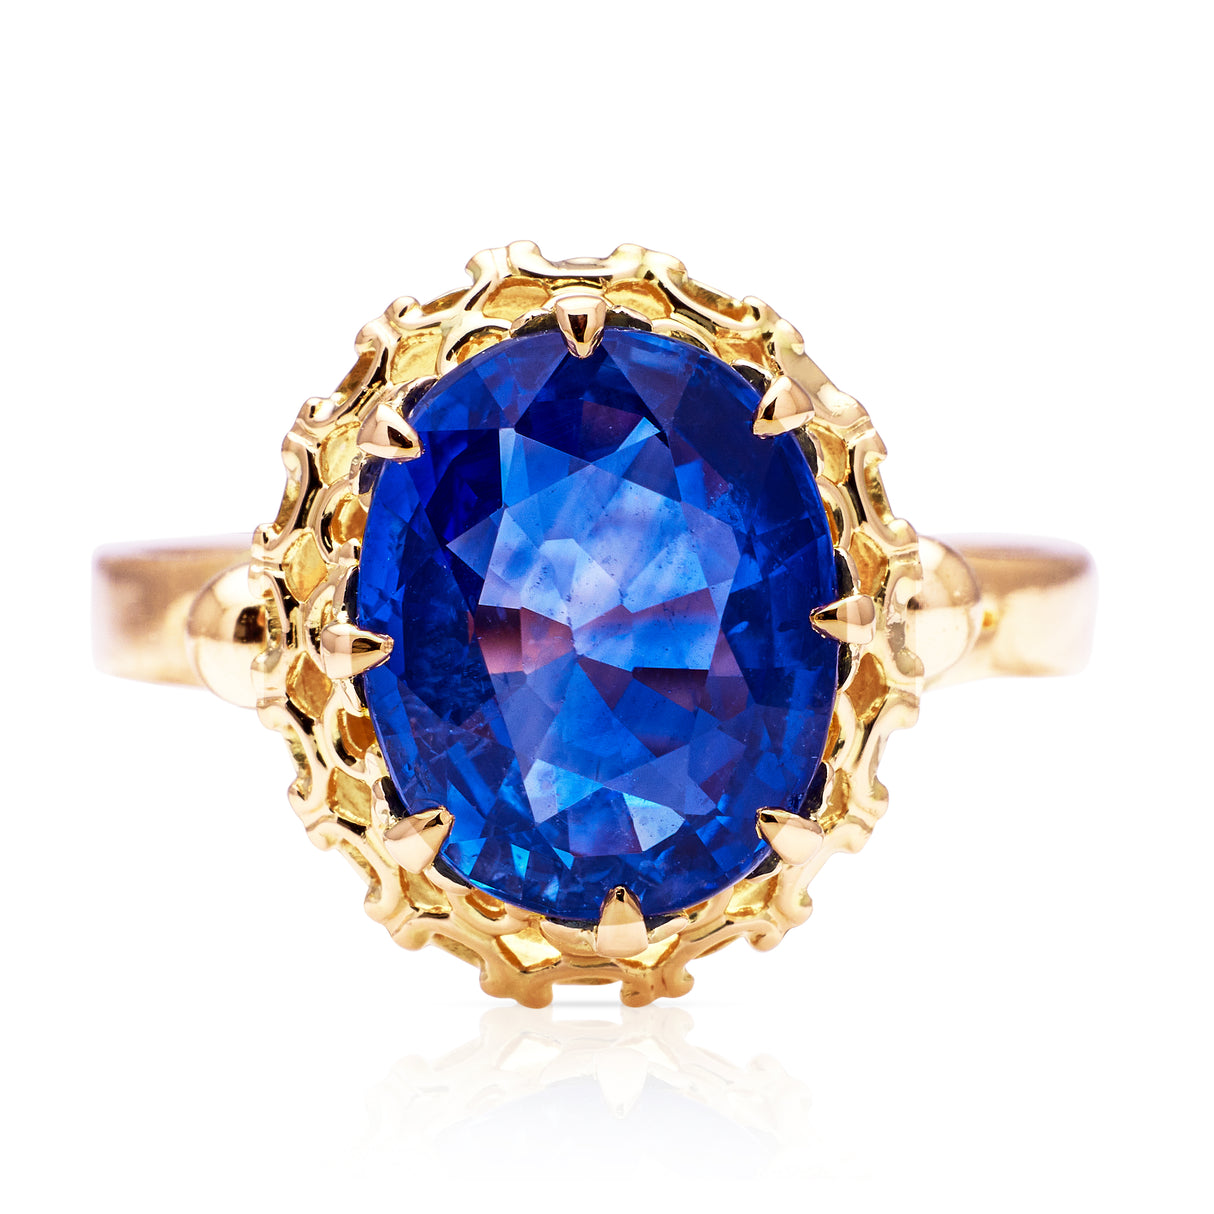 Vintage sapphire engagement ring, front view